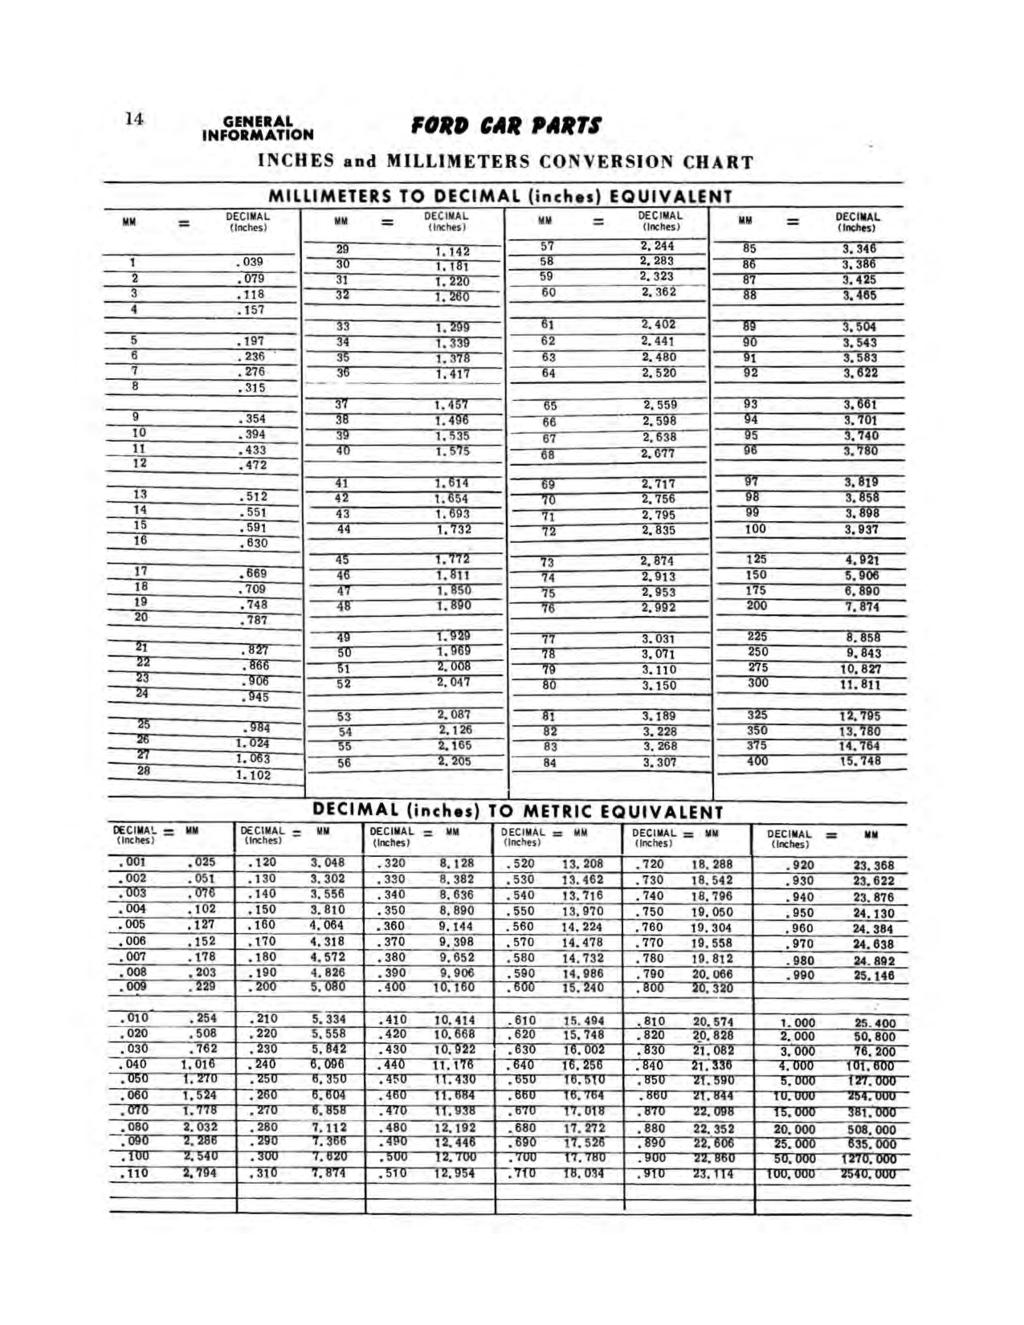 14 GENERAL INFORMATION MM FORD CAR PARTS INCHES and MILLIMETERS CONVERSION CHART MILLIMETERS TO DECIMAL [inches) EQUIVALENT DECIMAL MM _ DECIMAL MM = DECIMAL - (Inches) (Inches) (Inches) MM _ DECIMAL